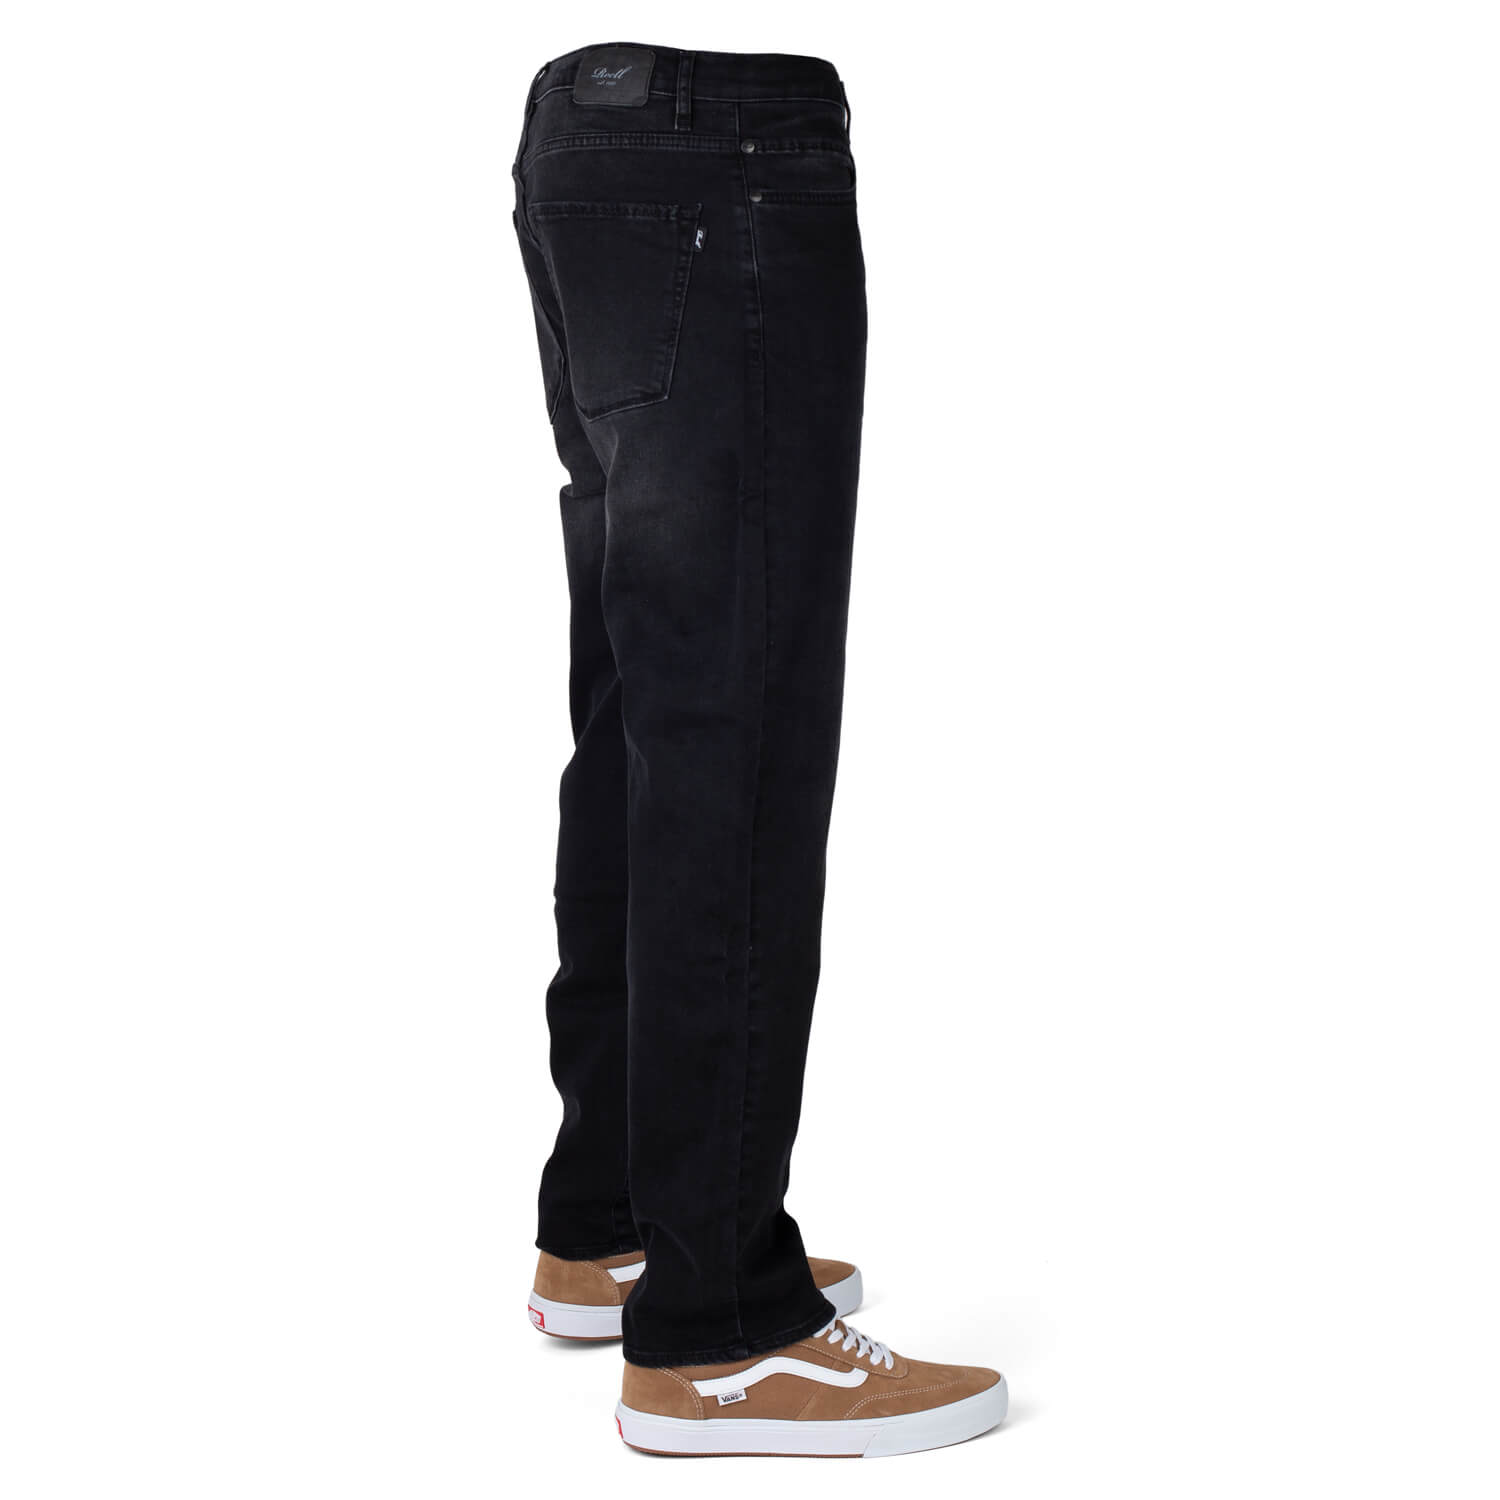 Reell Barfly Relaxed Straight Fit Pant black wash - Lässige 5-Pocket Jeans  Hose